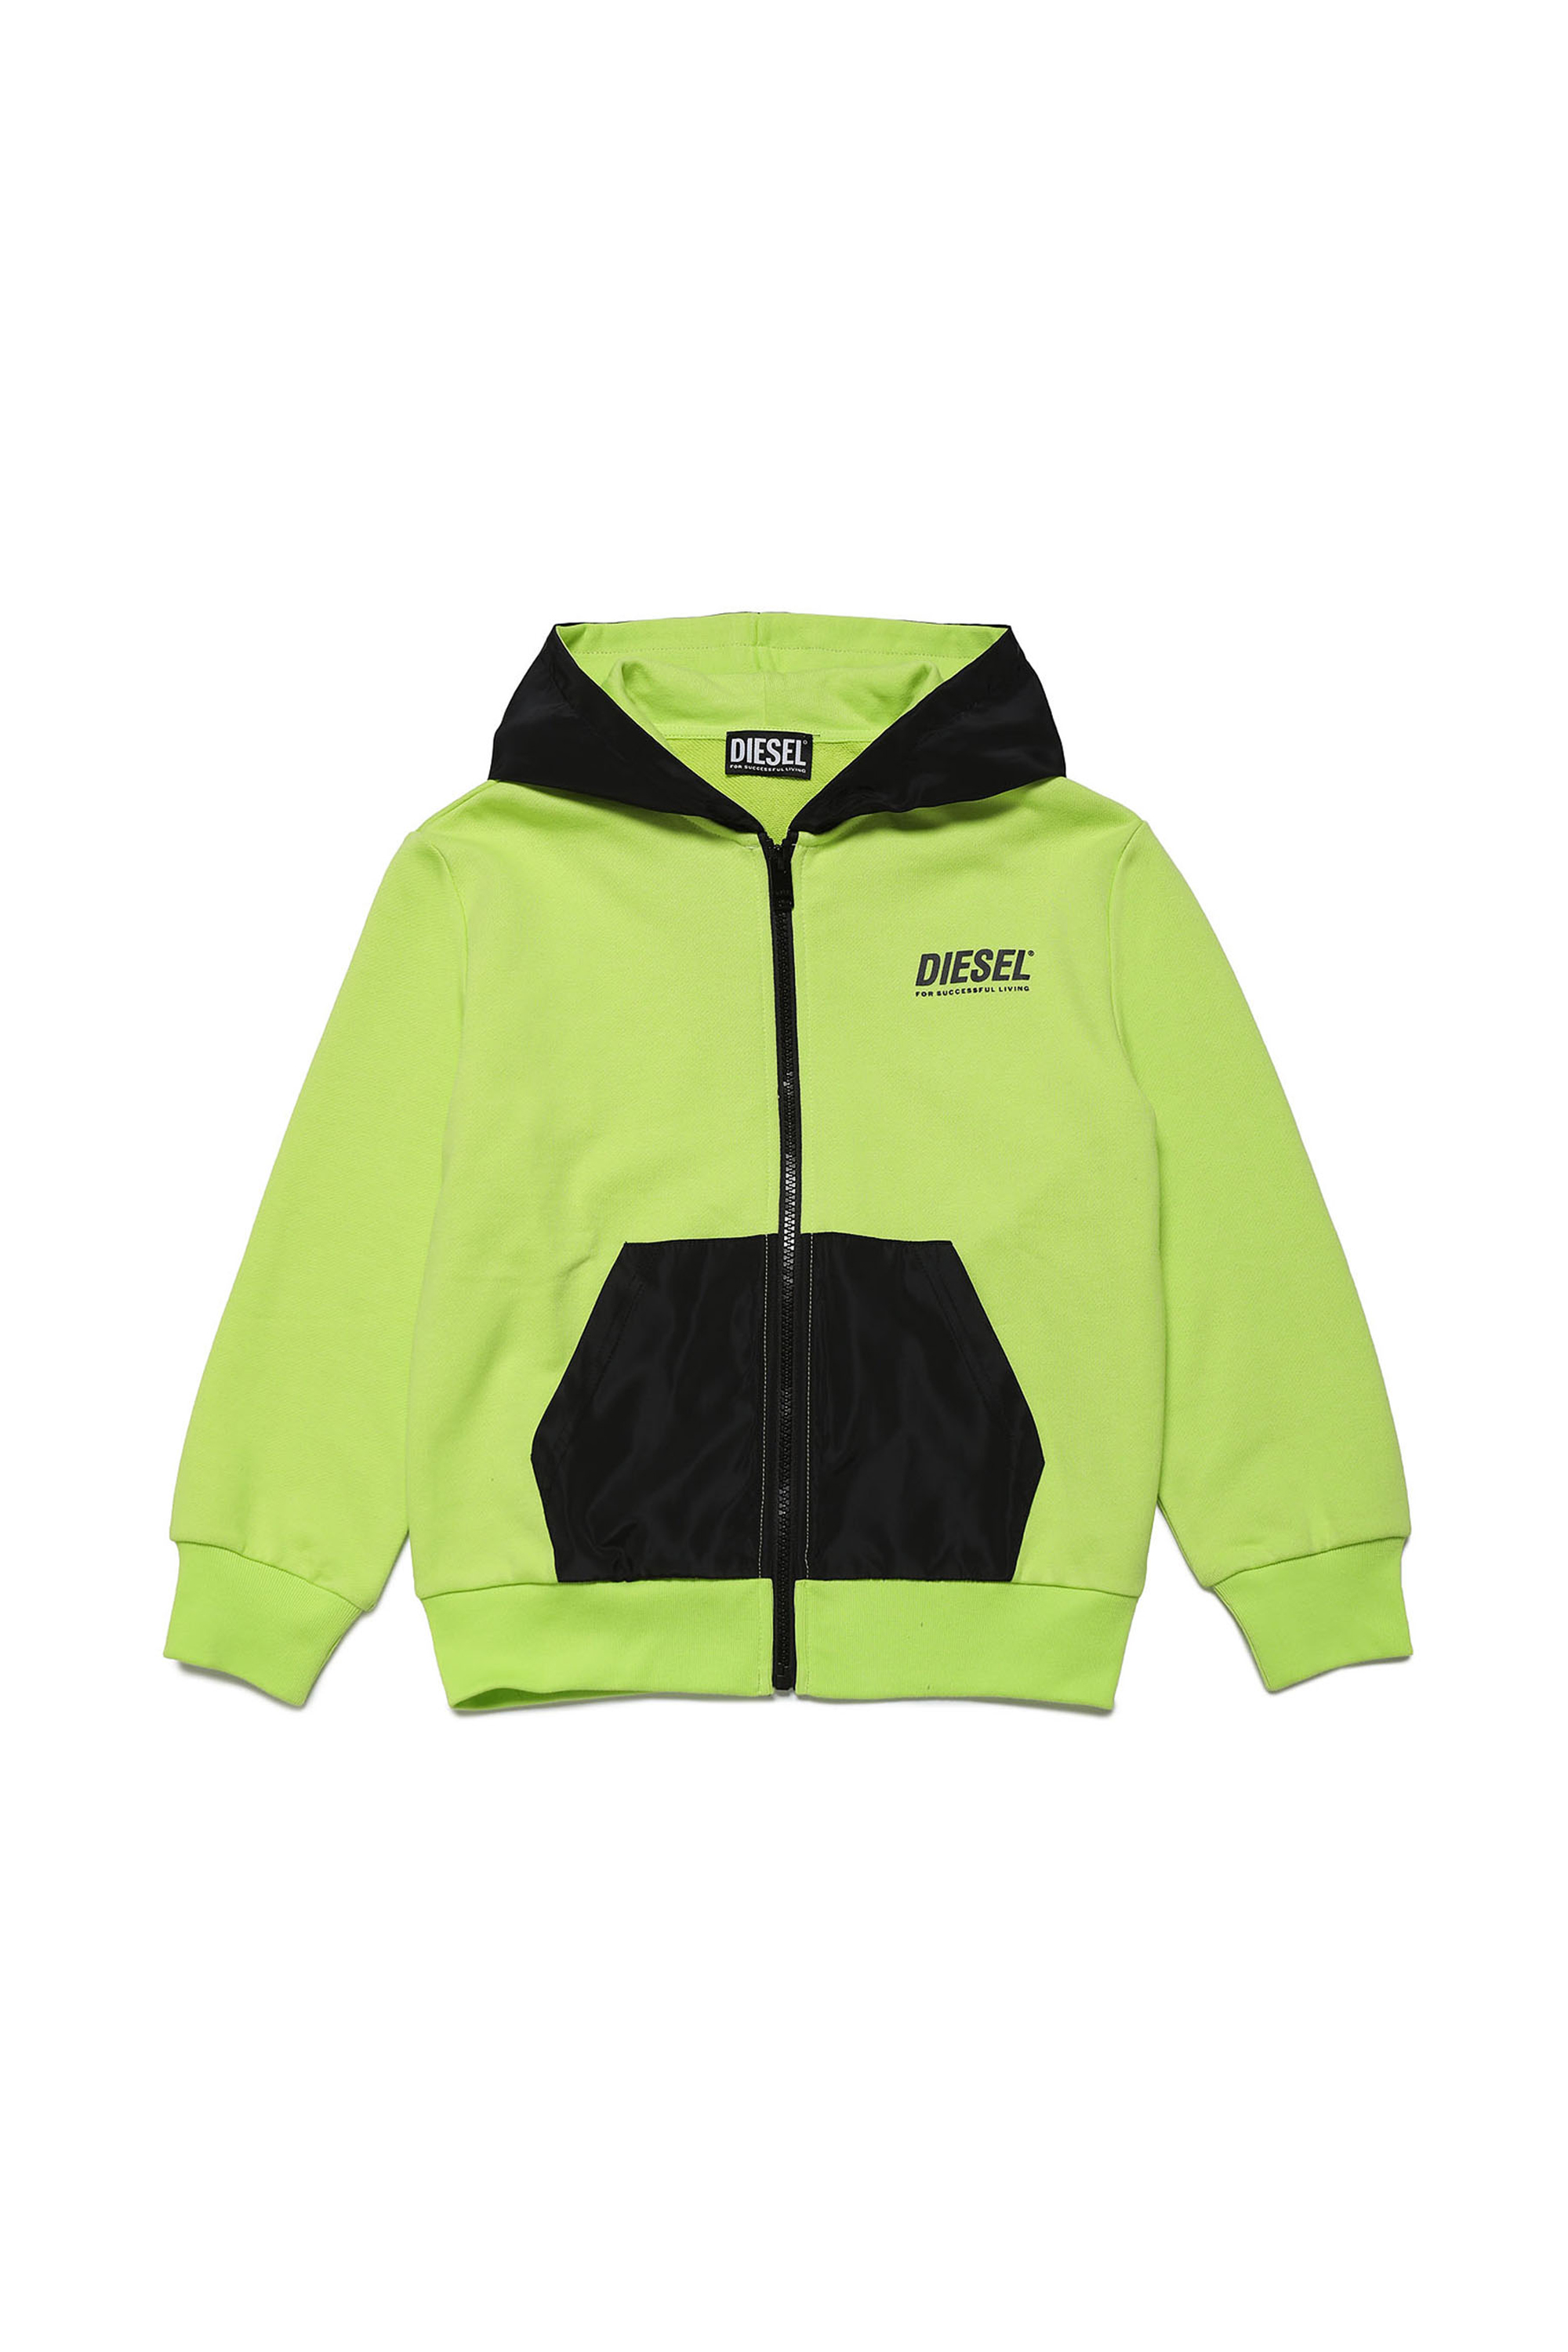 Diesel - MSEMMY OVER, Giallo Fluo - Image 1